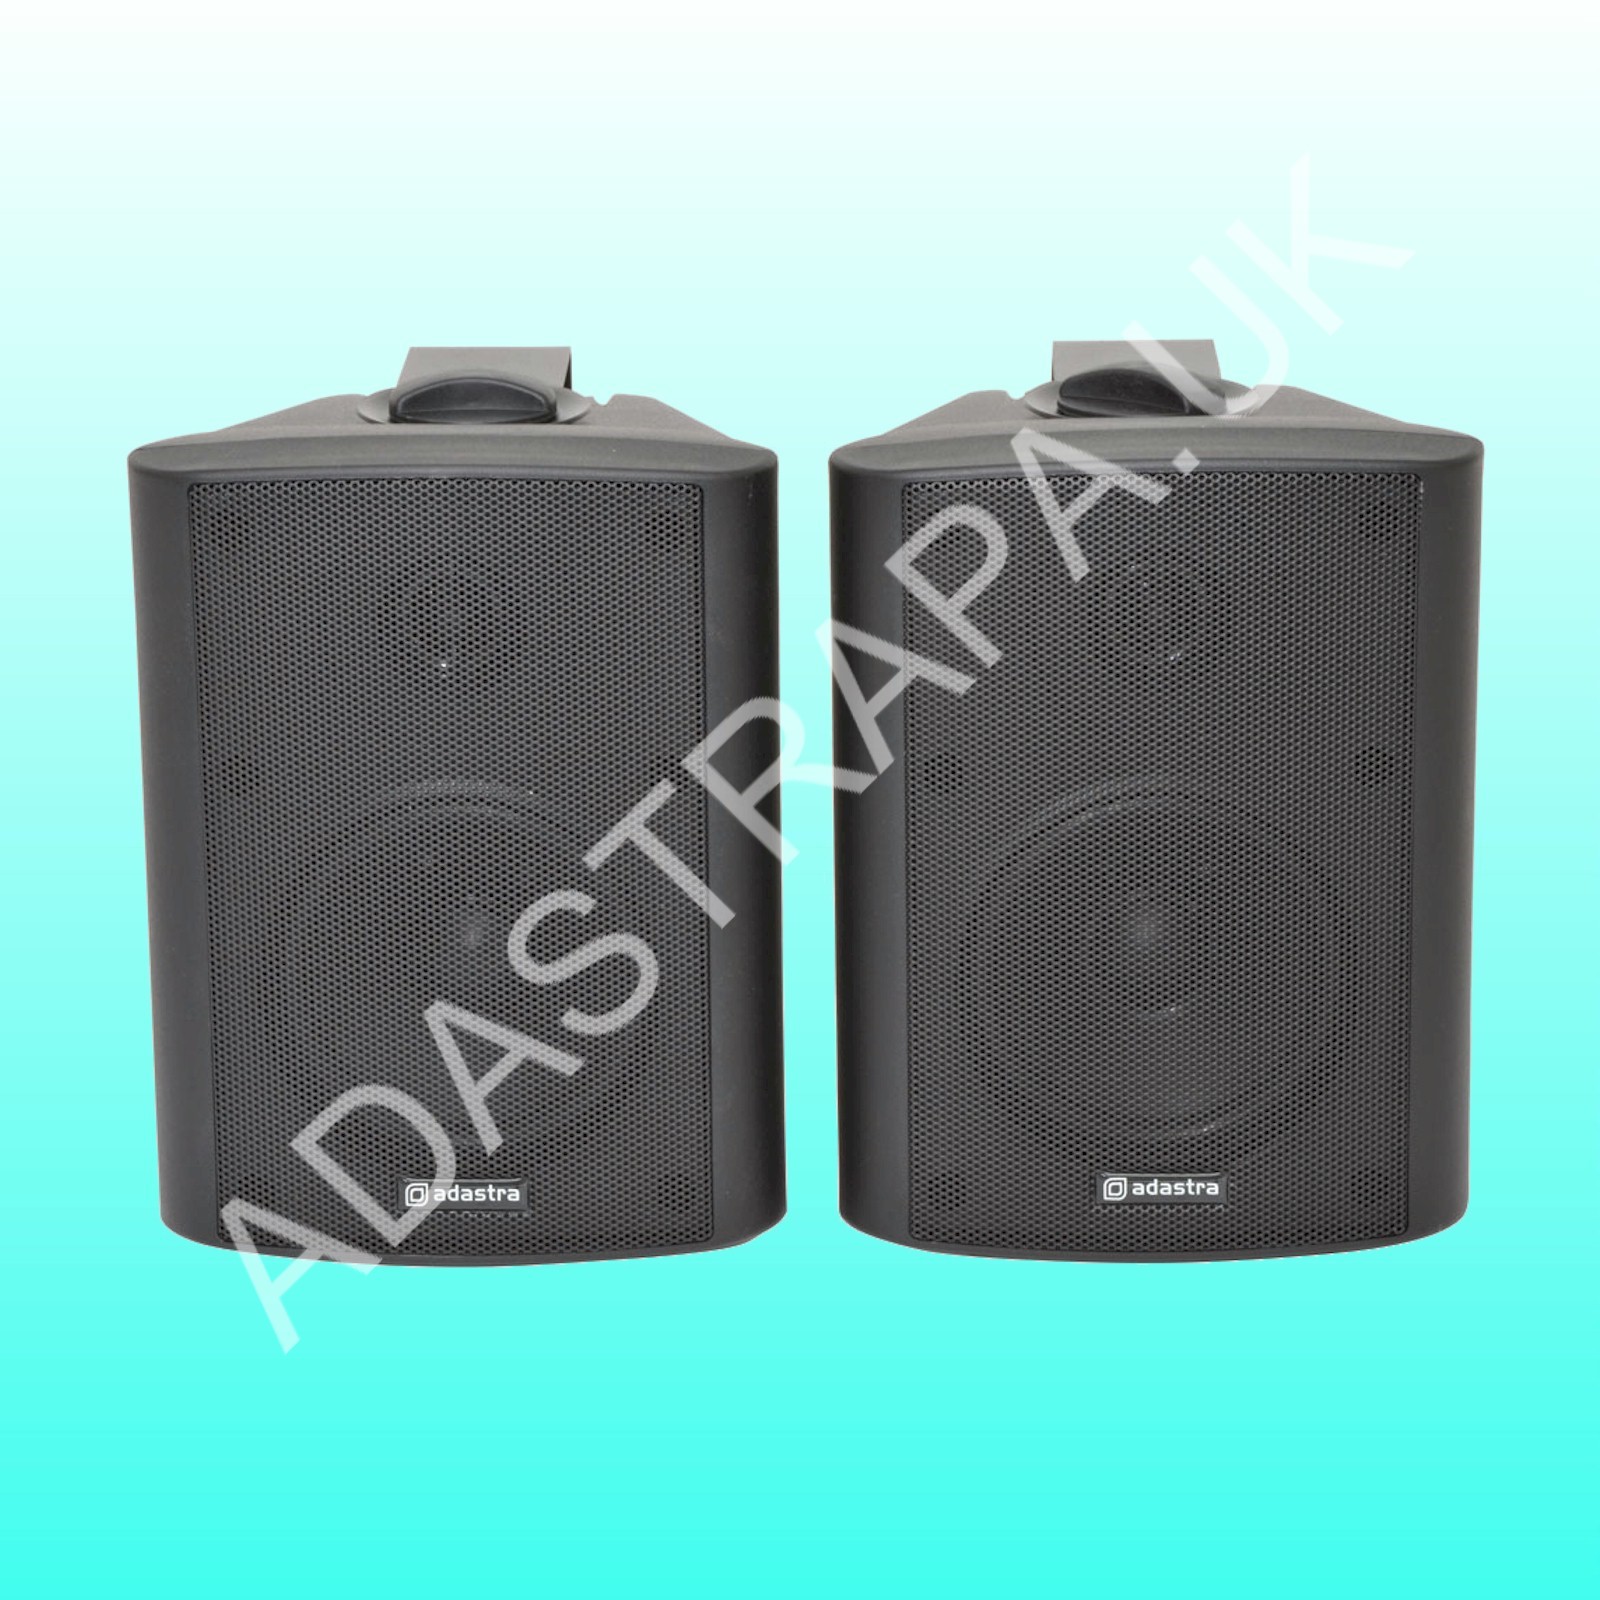 Adastra A8/BC5-B 4 x 2 x 200W rms Stereo Indoor Music PA System 45W rms 5.25